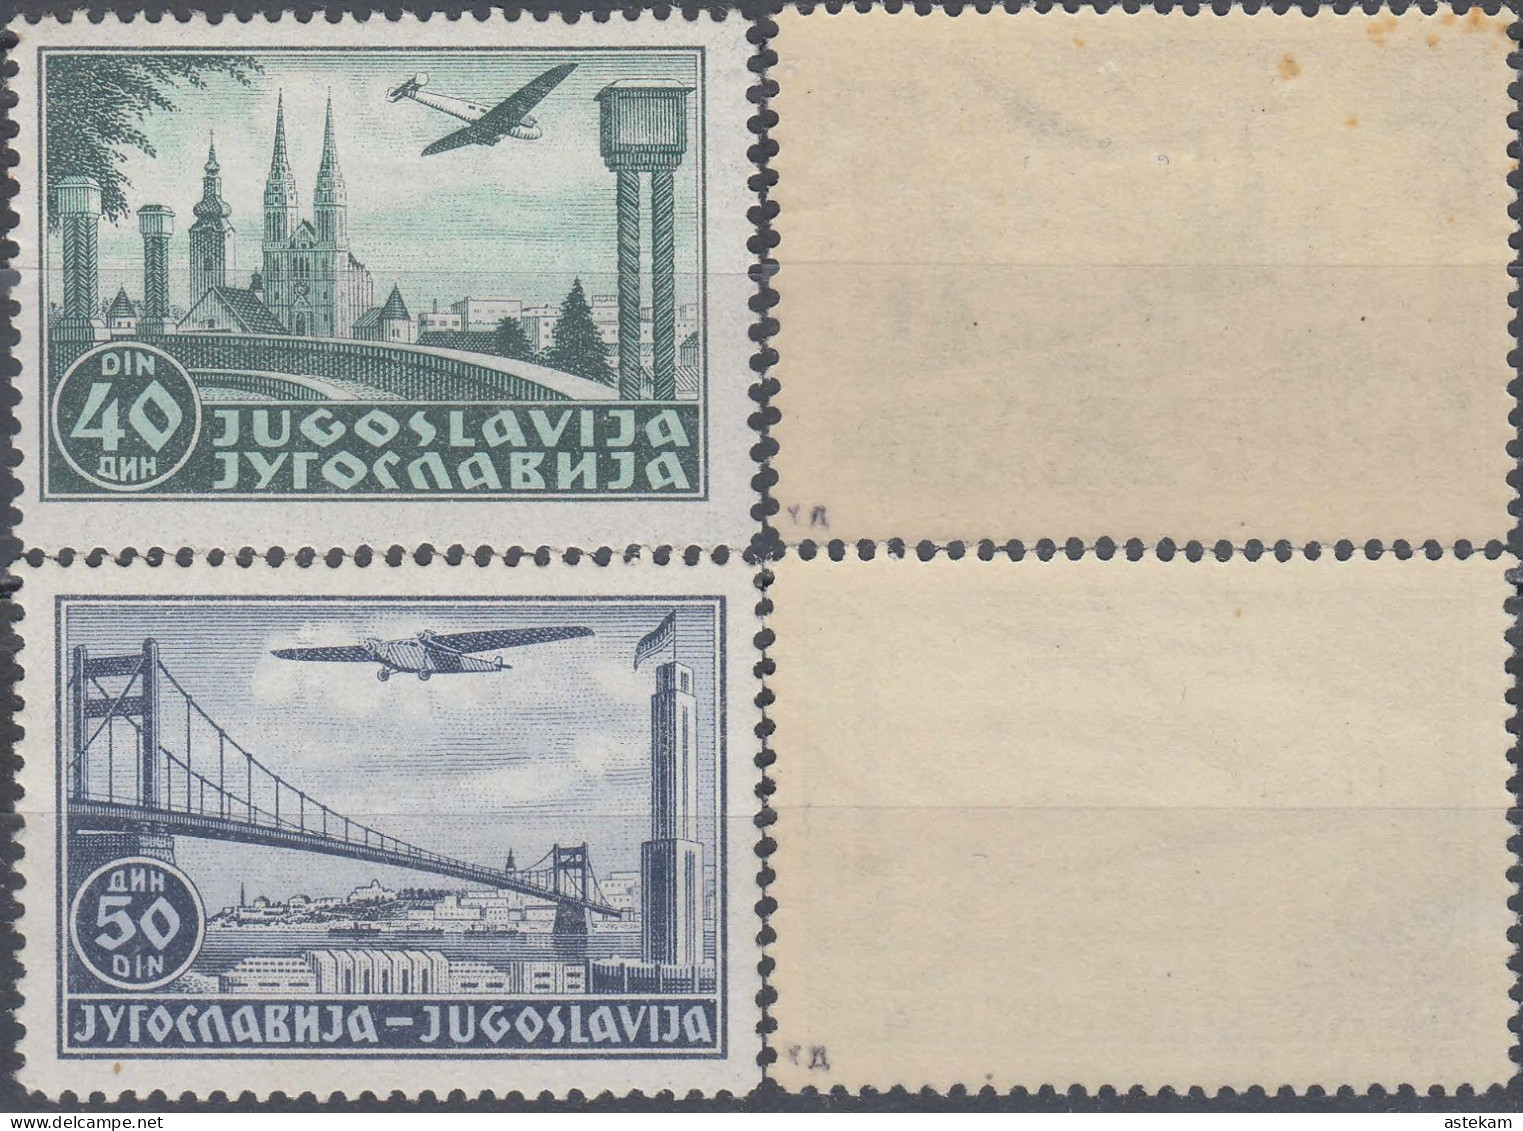 YUGOSLAVIA 1940, AIRPLANES And BRIDG, COMPLETE, MNH SERIES, The FIRST STAMP Has SMALL YELLOW SPOTS In The UPPER CORNER - Neufs